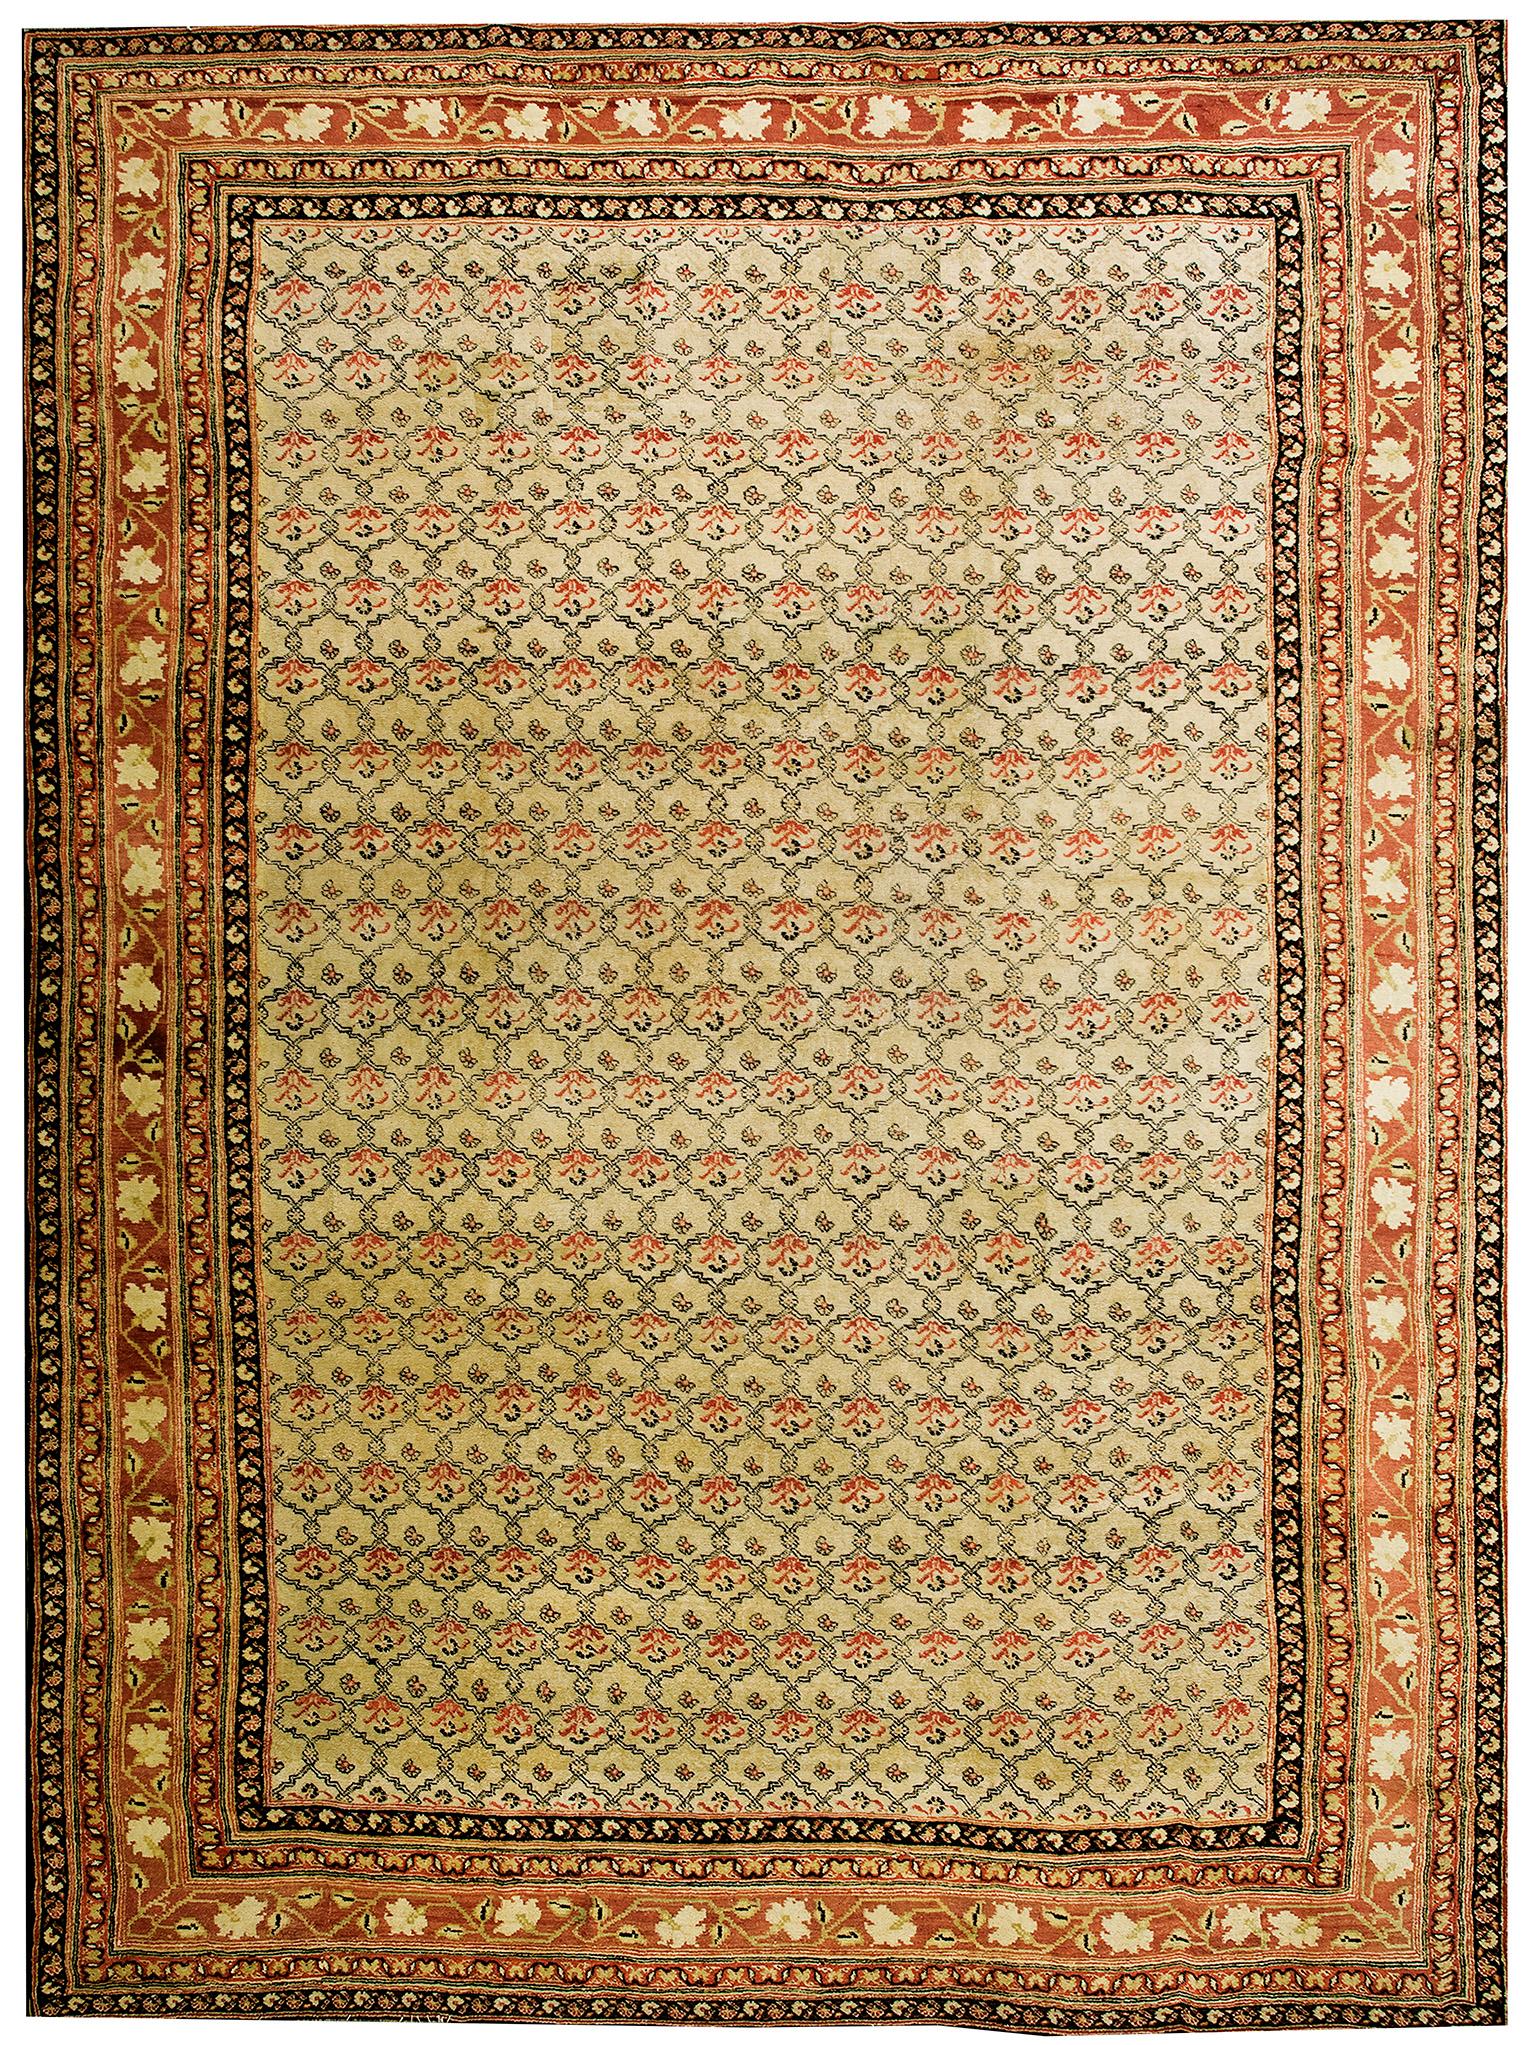 19th Century N. Indian Agra Carpet ( 10'8" x14'8" - 325 x 447 ) For Sale